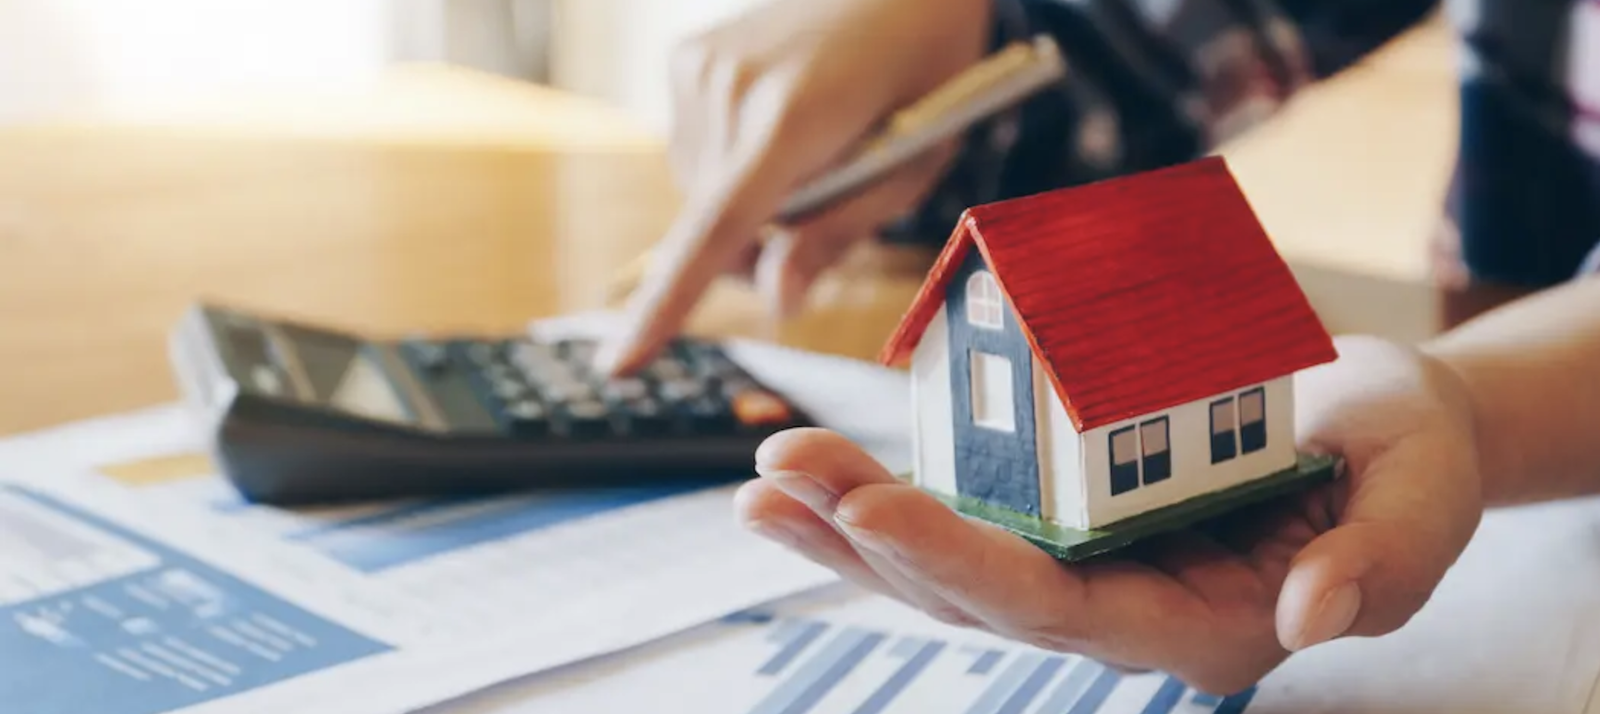 Man holding home figurine in one hand while using calculator to calculate home mortgage with the other hand 